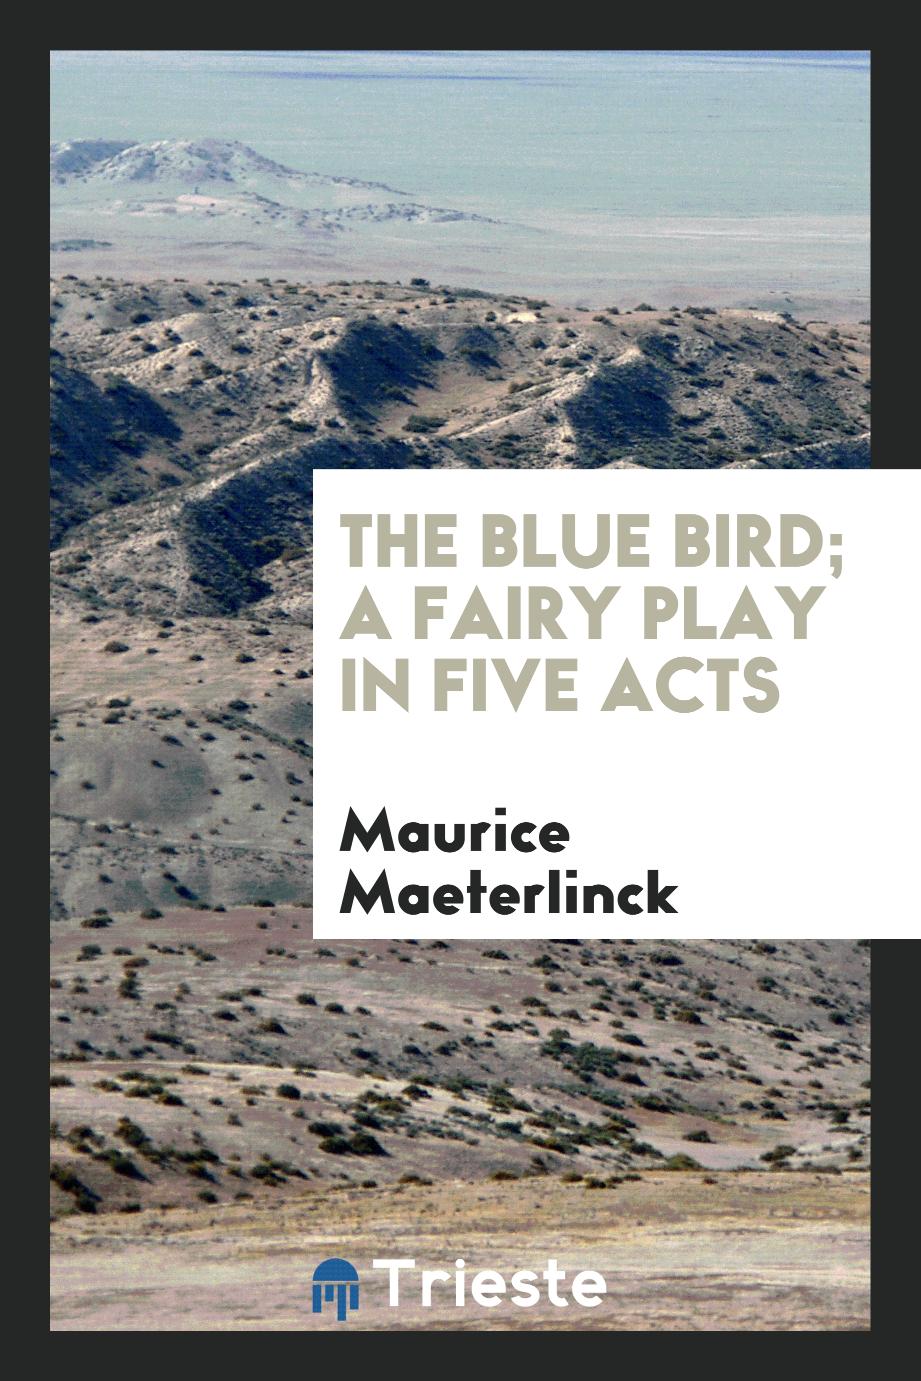 The blue bird; a fairy play in five acts